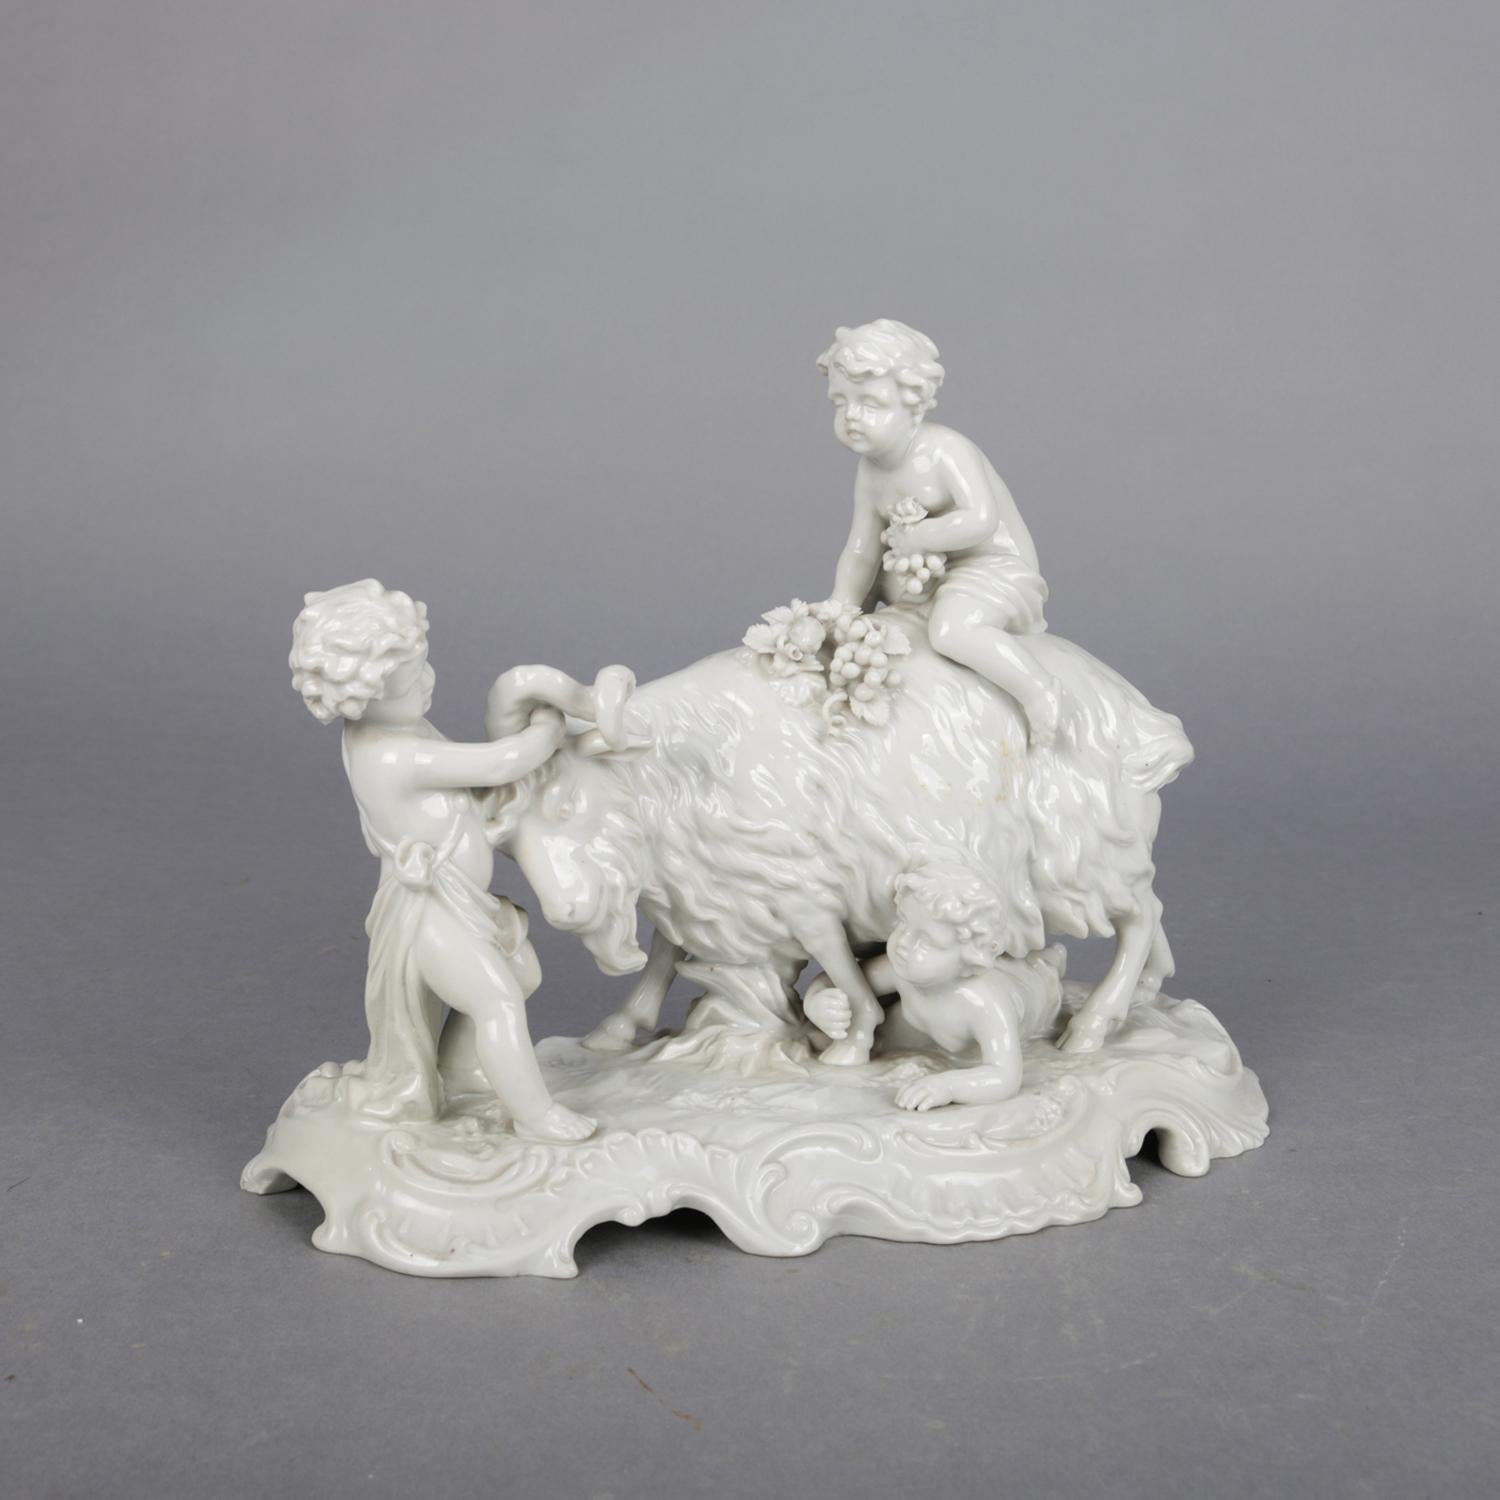 An antique Italian Capodimonte figural Blanc de Chine grouping depicts Classical farm scene of playful cherubs or putti and a goat, crown 